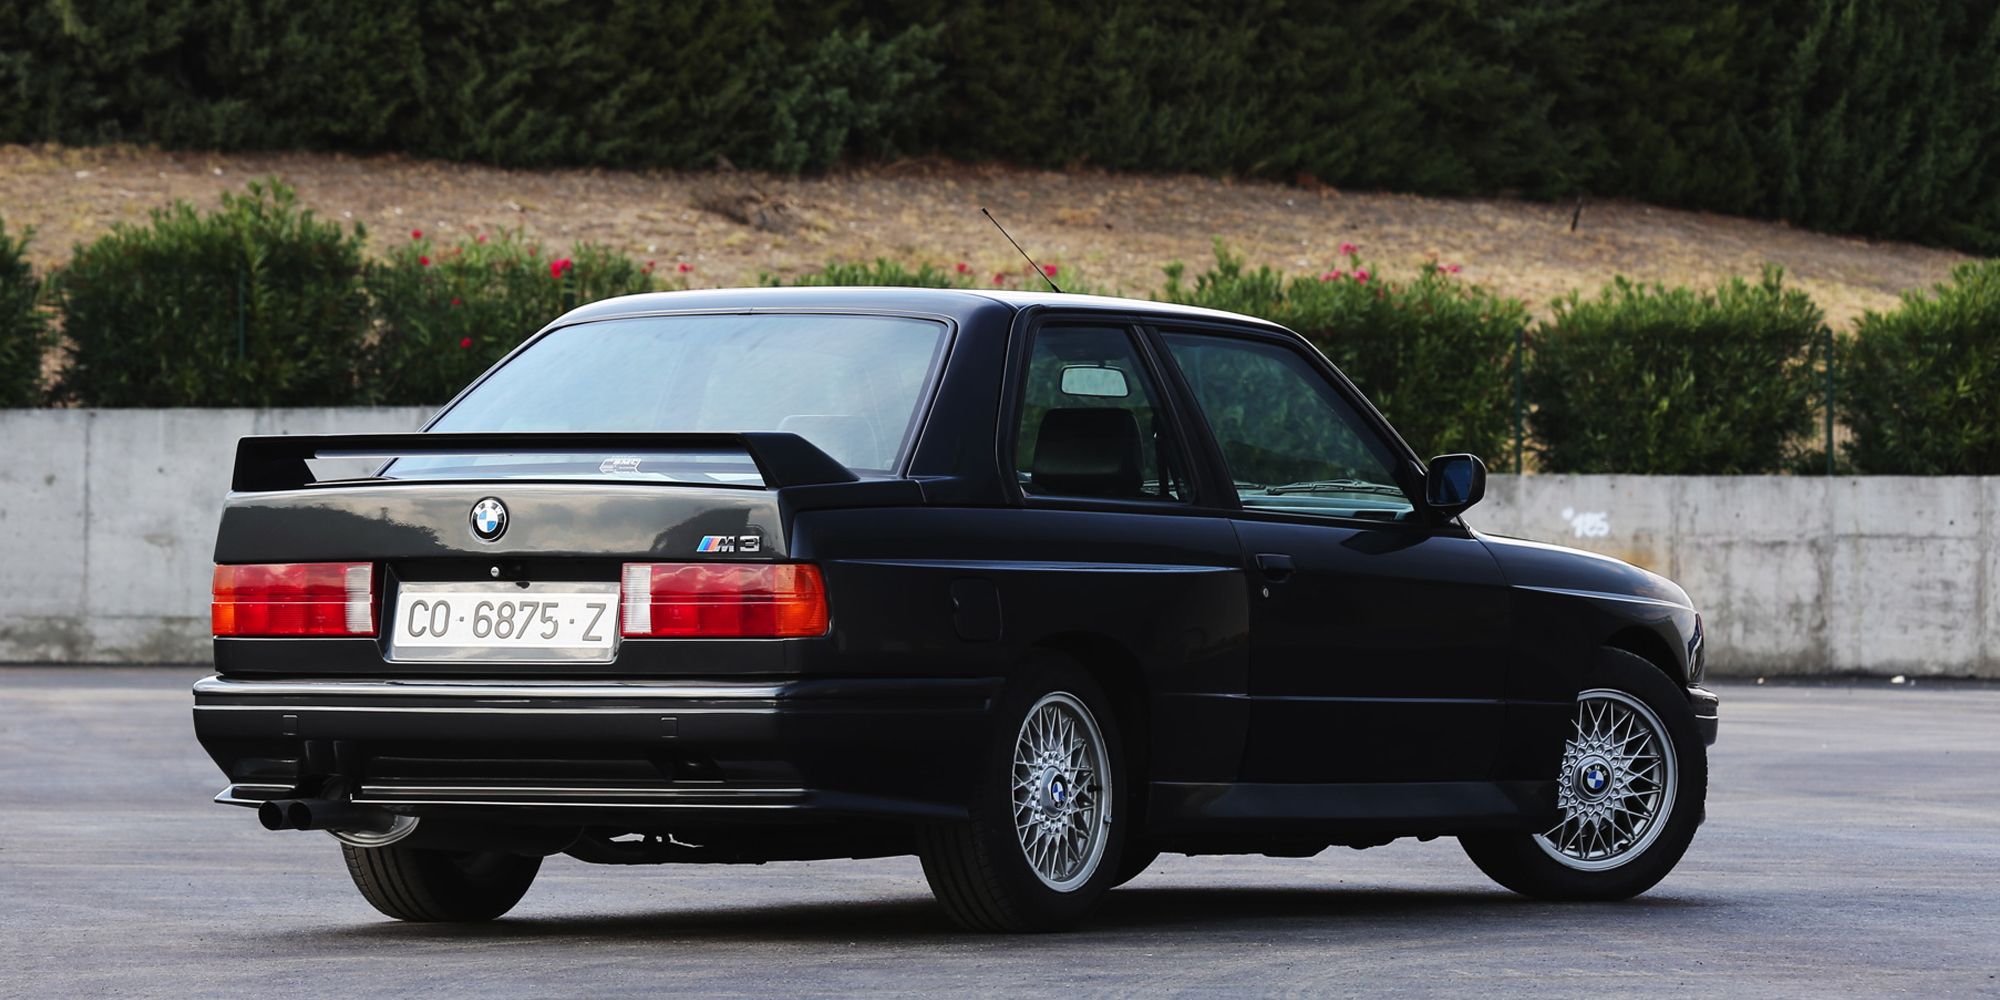 The rear of the E30 M3